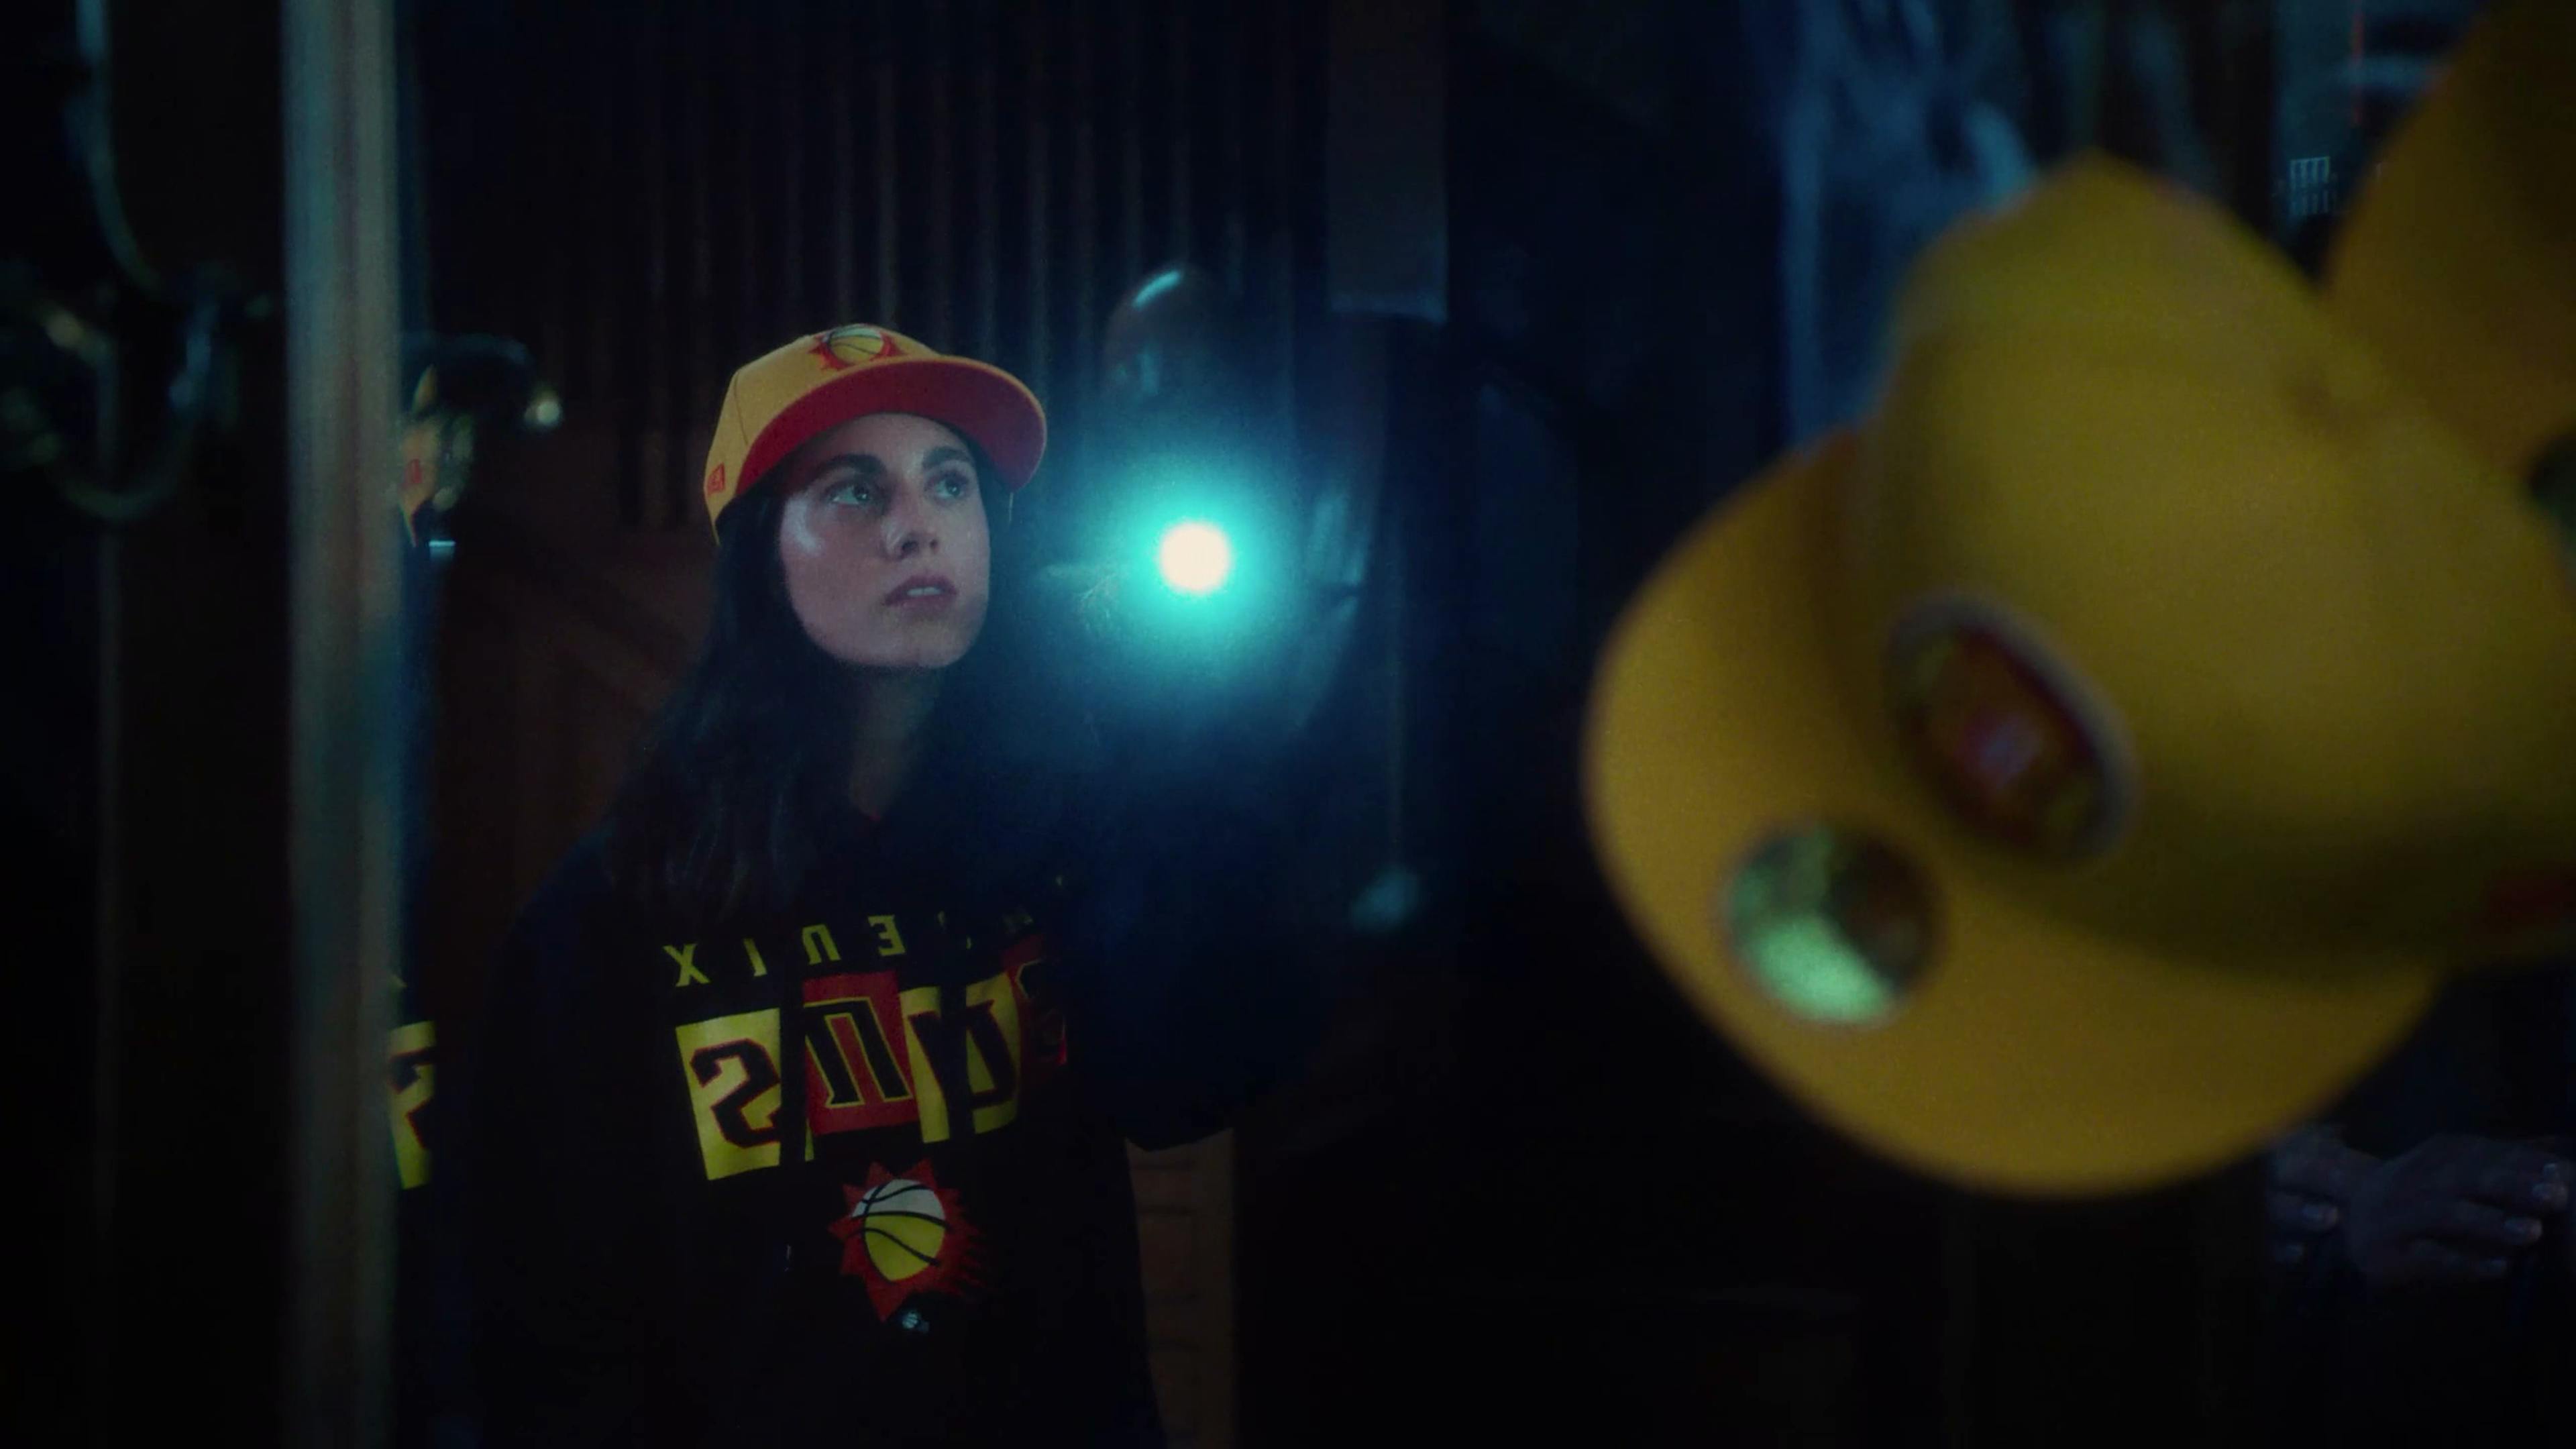 A person with a focused gaze, wearing a New Era cap and a basketball sweatshirt, holding a flashlight that illuminates their face in a dimly lit setting.